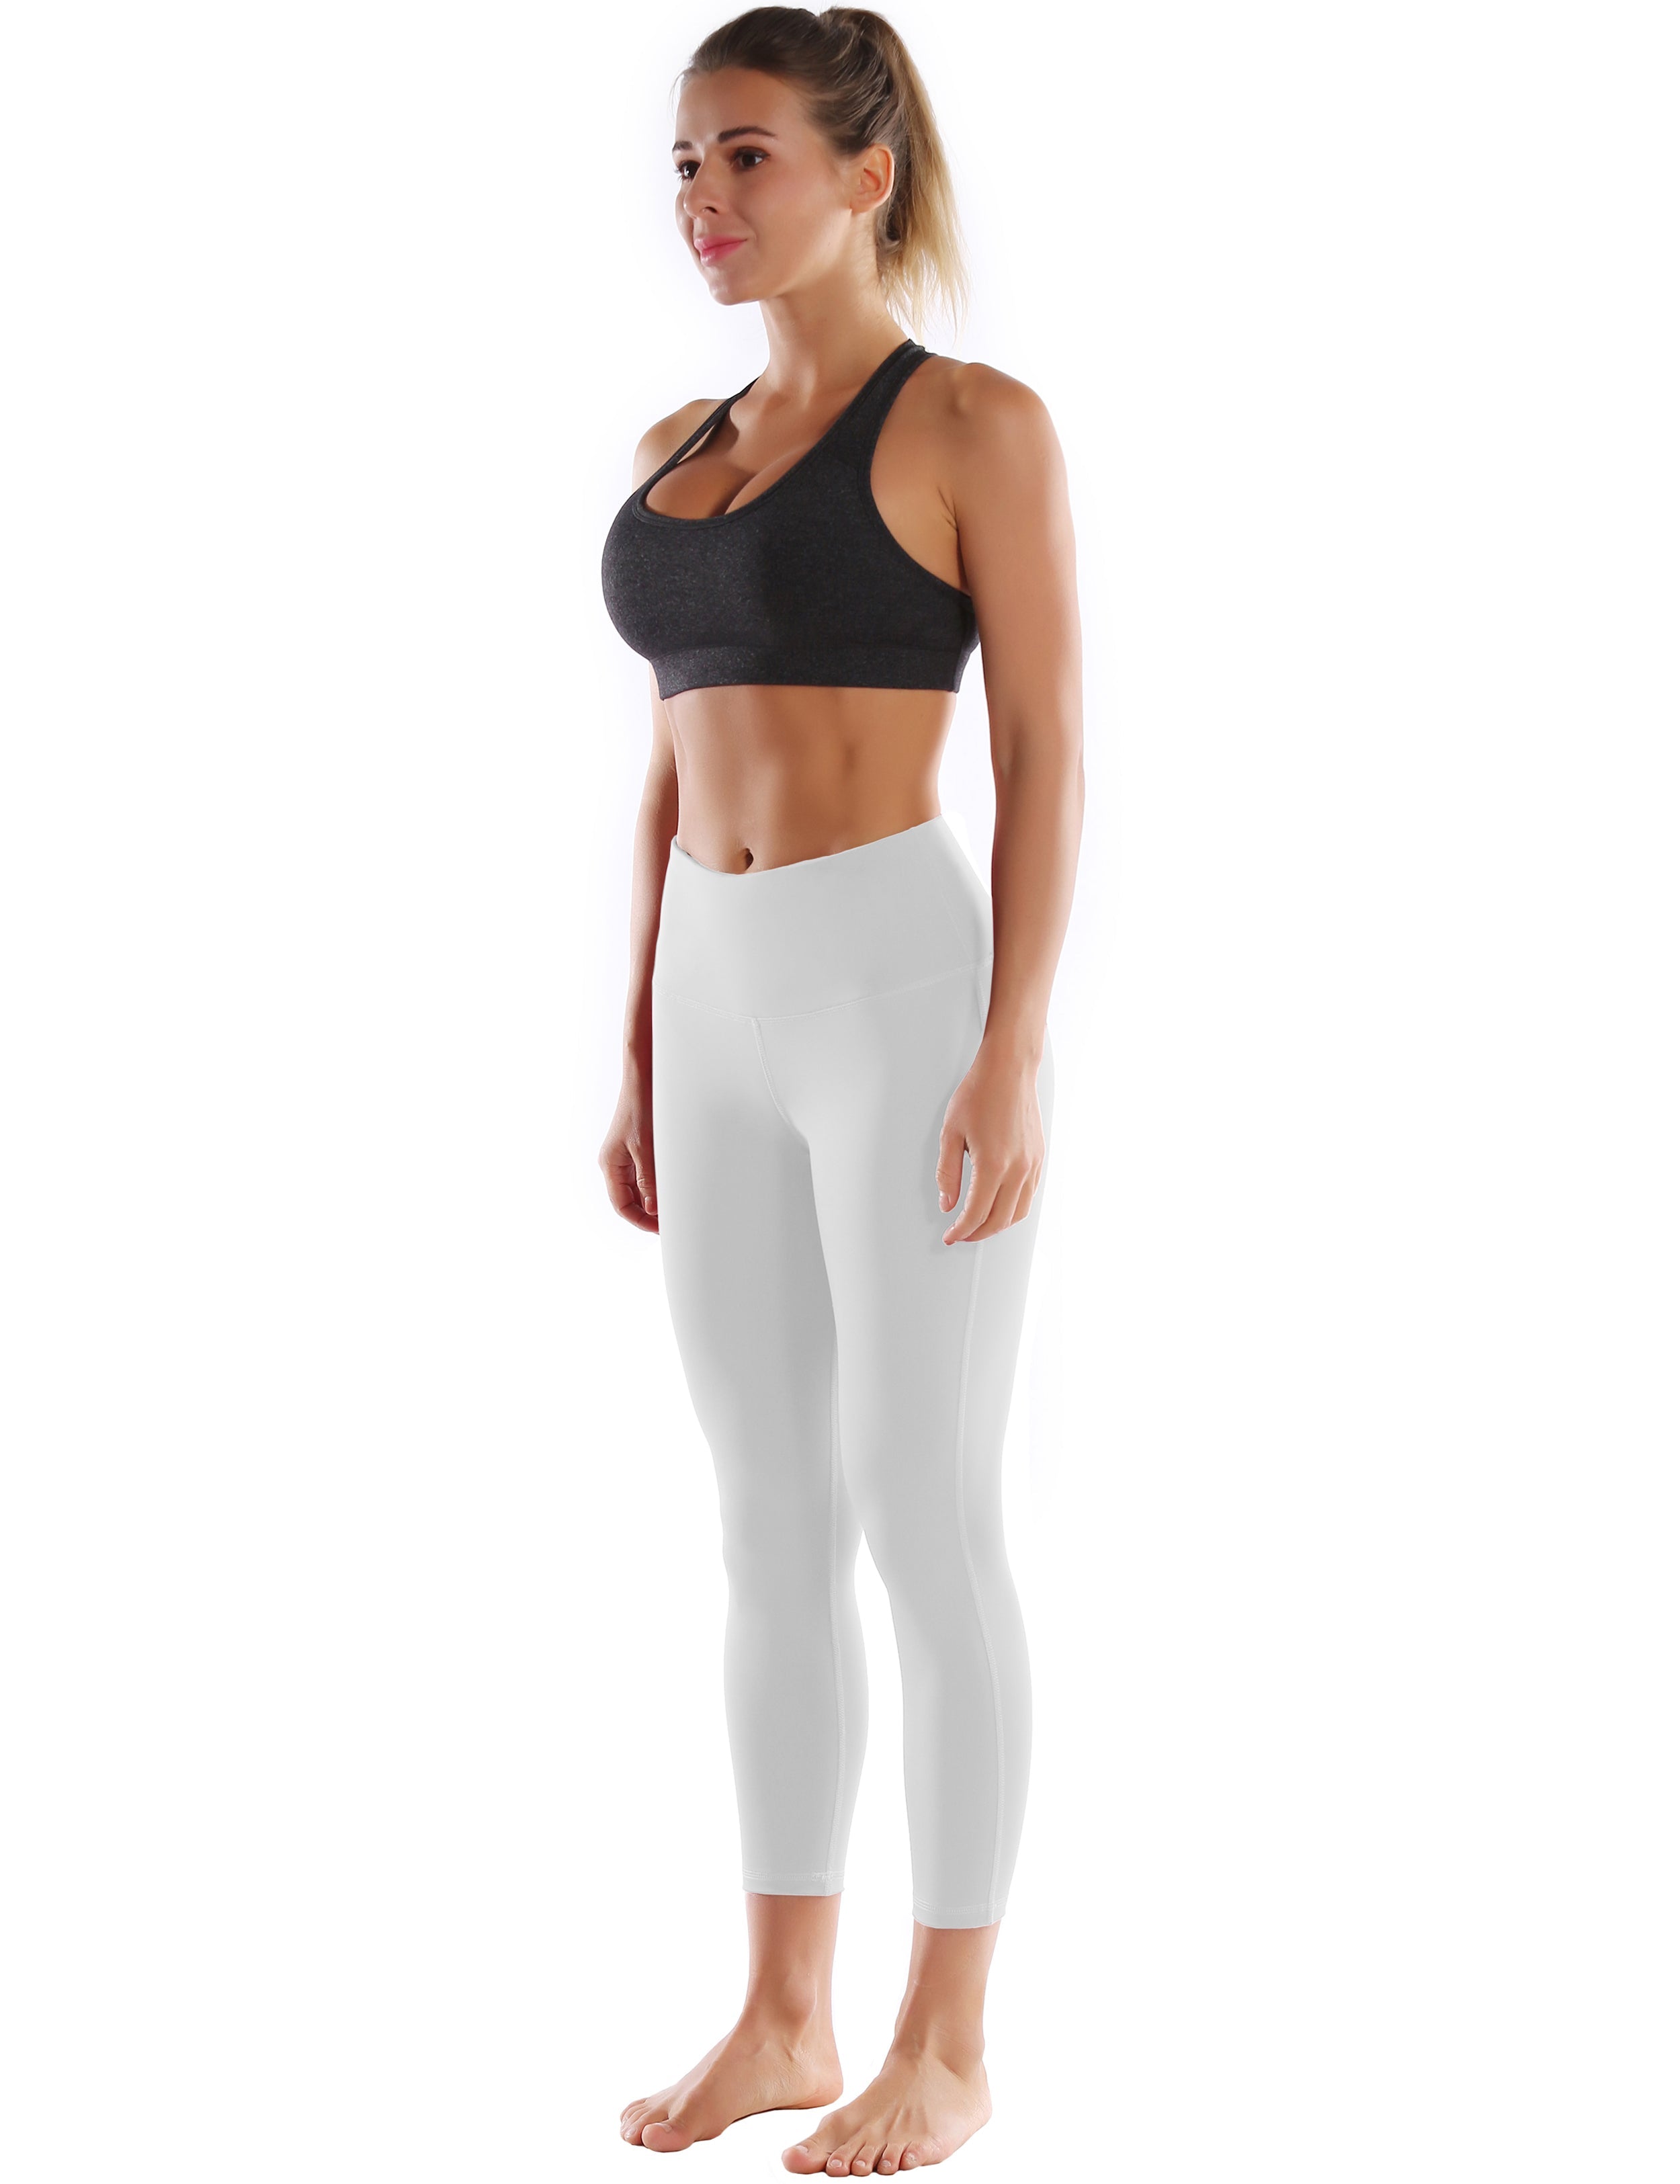 22" High Waist Side Line Capris lightgray 75%Nylon/25%Spandex Fabric doesn't attract lint easily 4-way stretch No see-through Moisture-wicking Tummy control Inner pocket